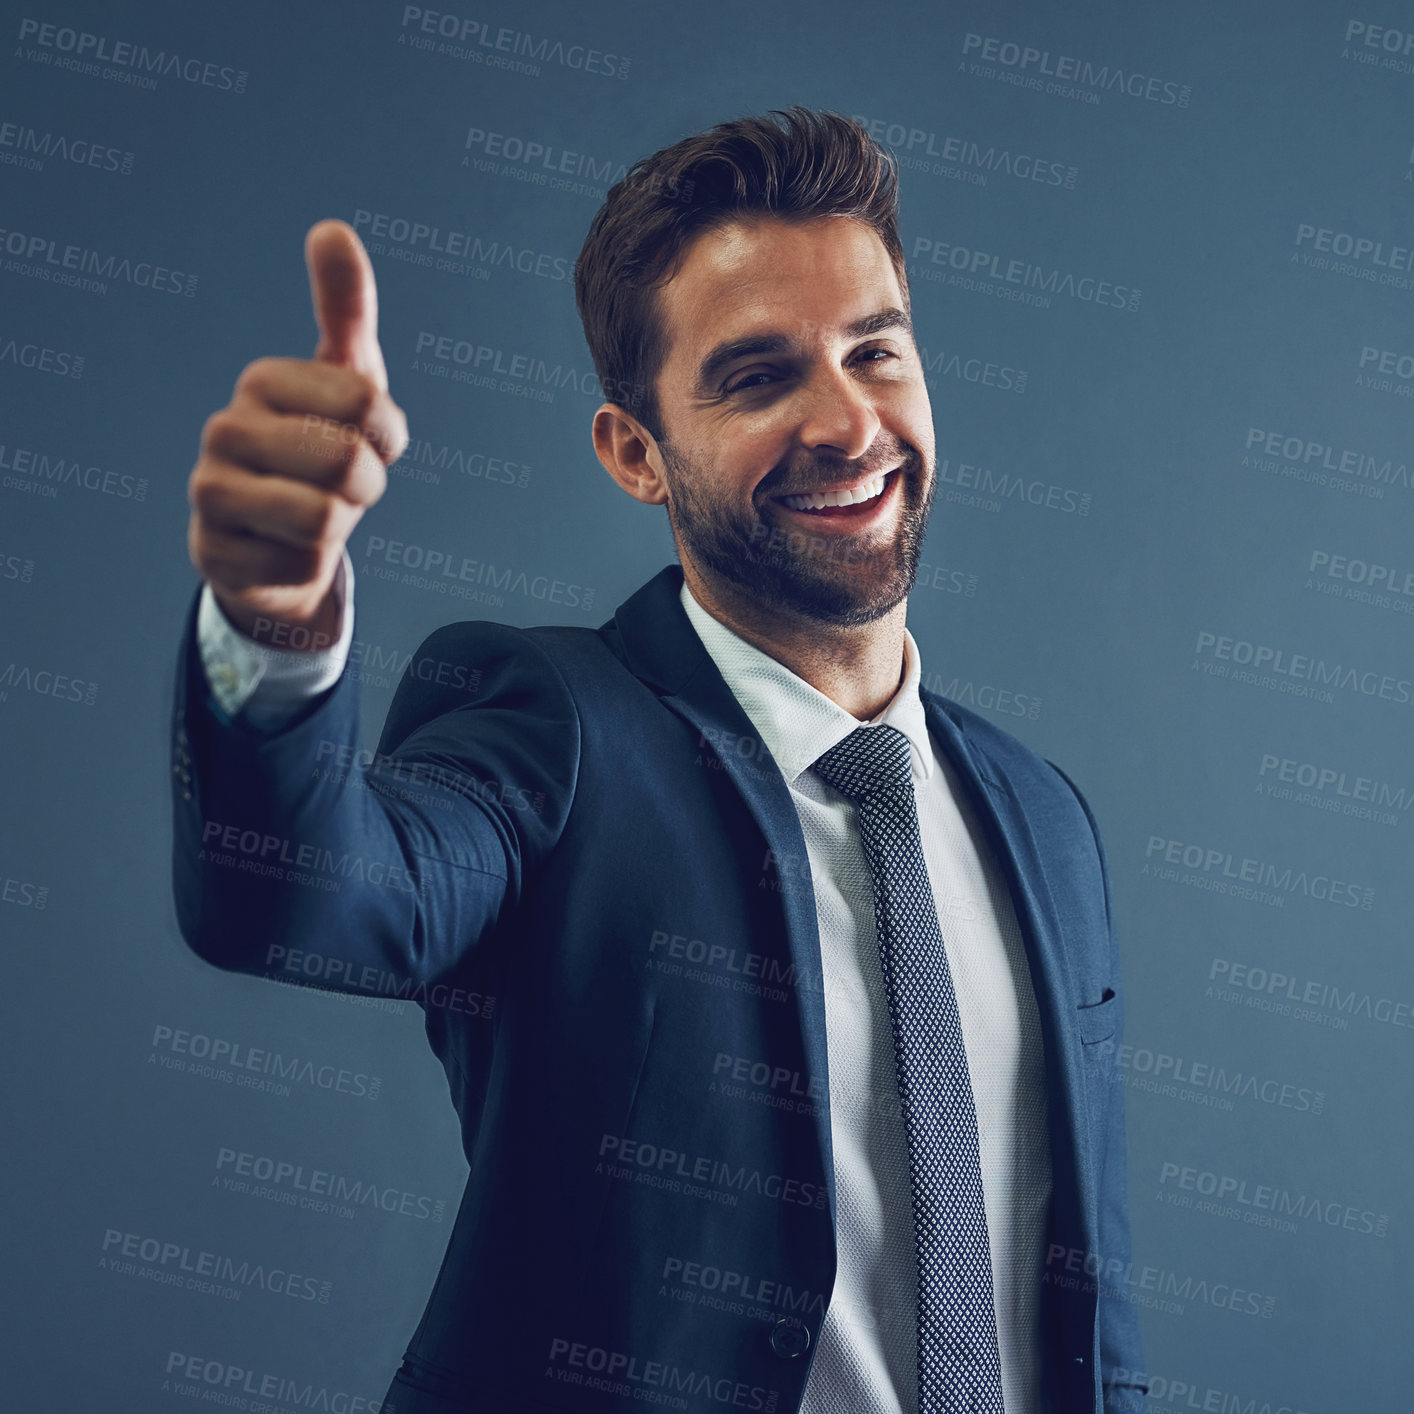 Buy stock photo Studio portrait of a handsome young businessman showing thumbs up against a dark background